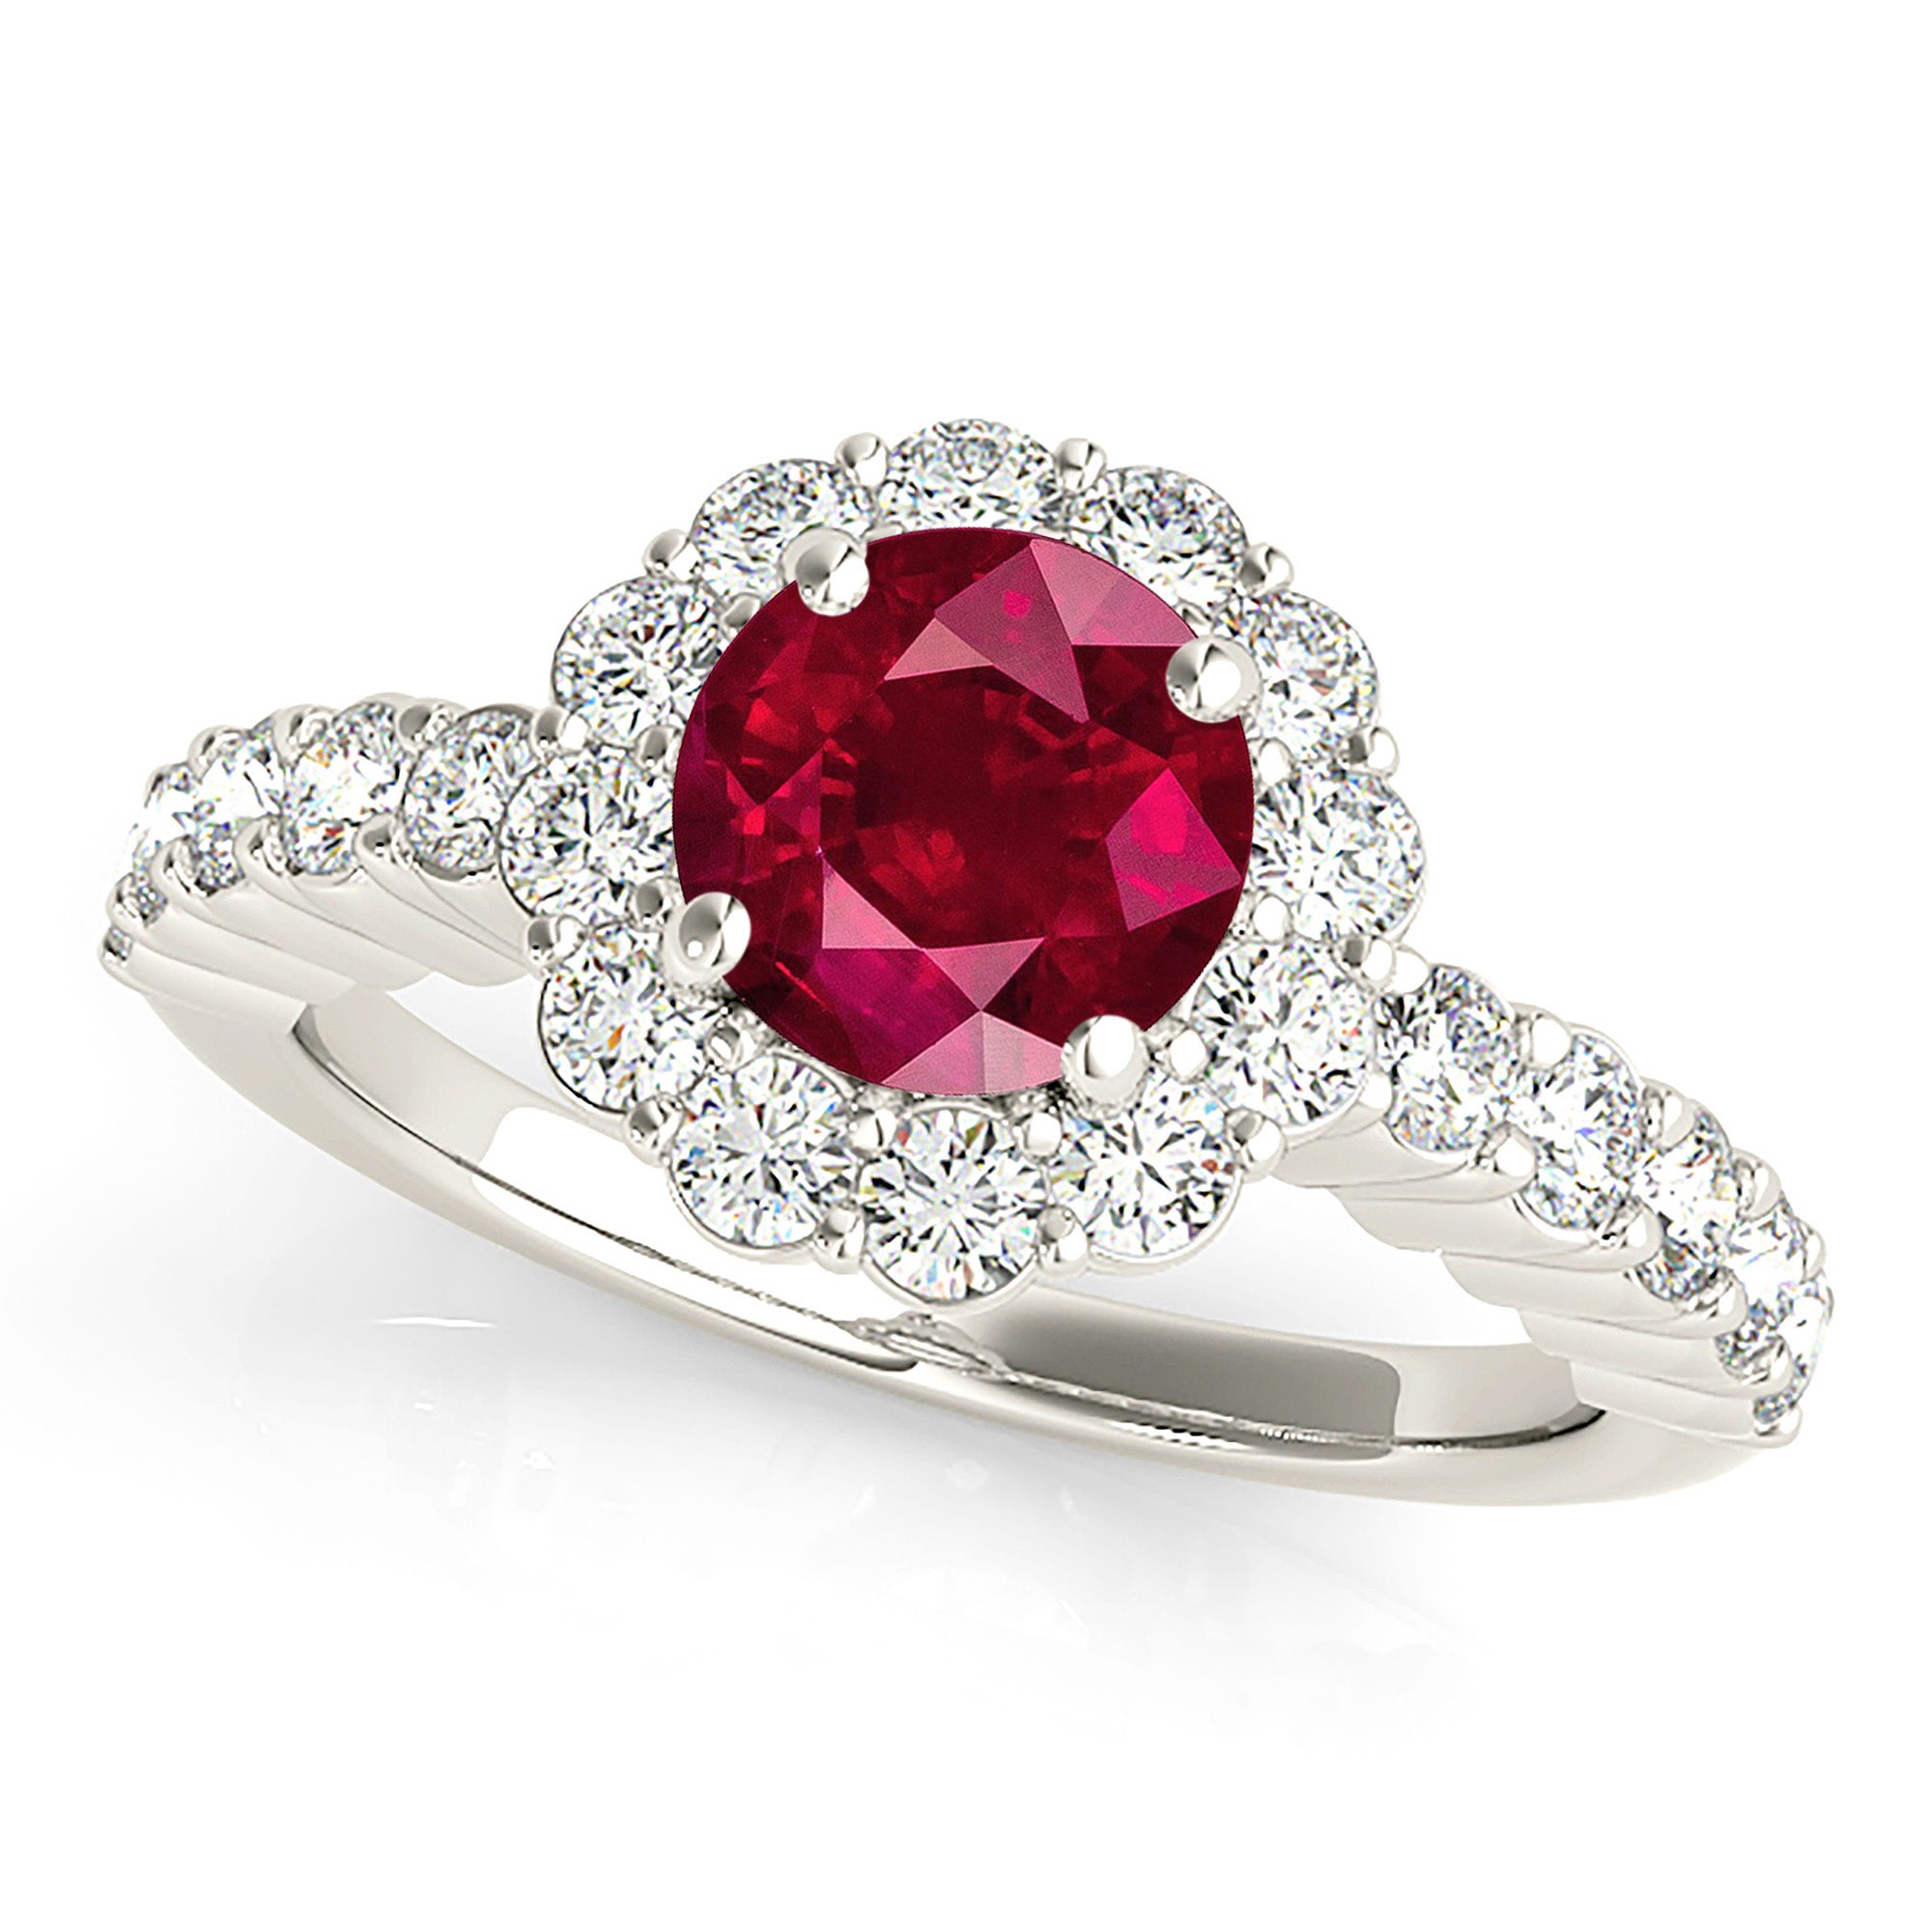 1.35 ct. Genuine Ruby Ring With 0.70 ctw. Diamond Floral Halo And Scalloped Diamond band-in 14K/18K White, Yellow, Rose Gold and Platinum - Christmas Jewelry Gift -VIRABYANI